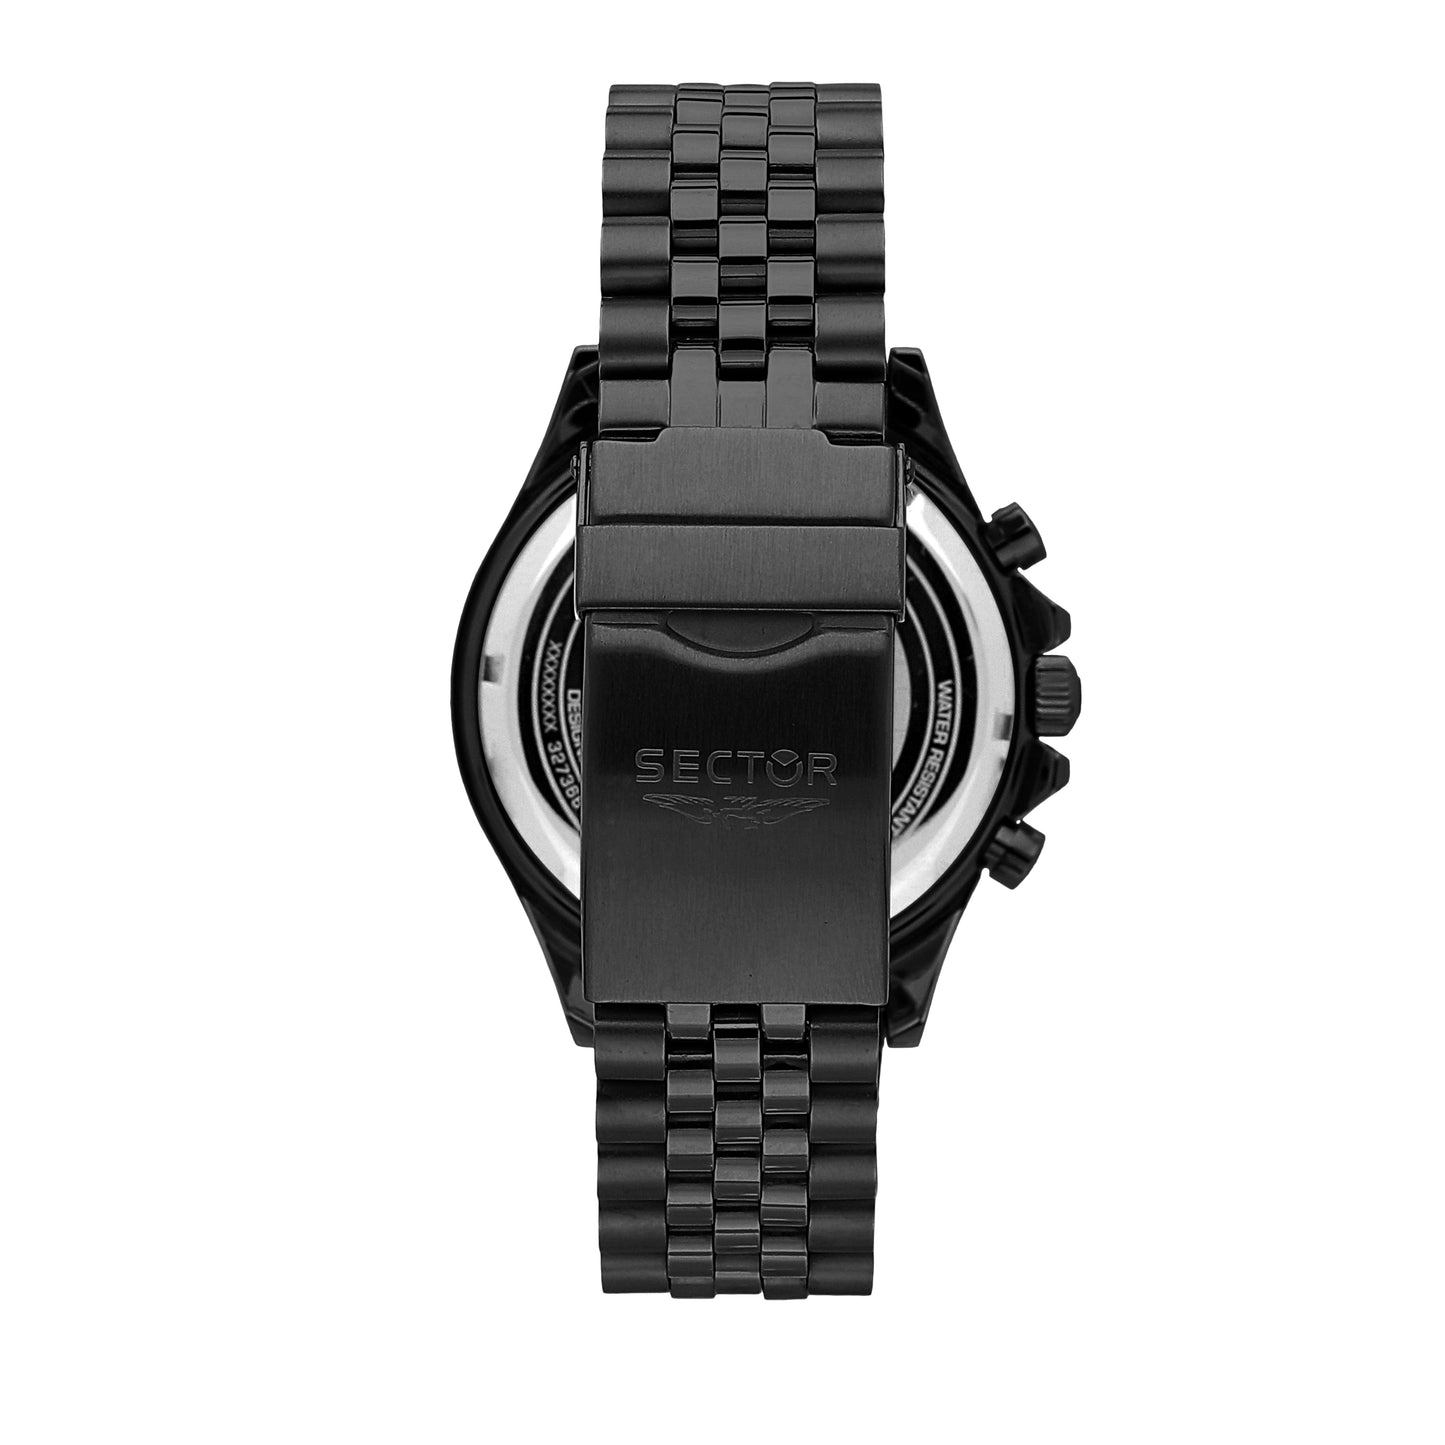 MONTRE HOMME SECTOR 230 R3273661029